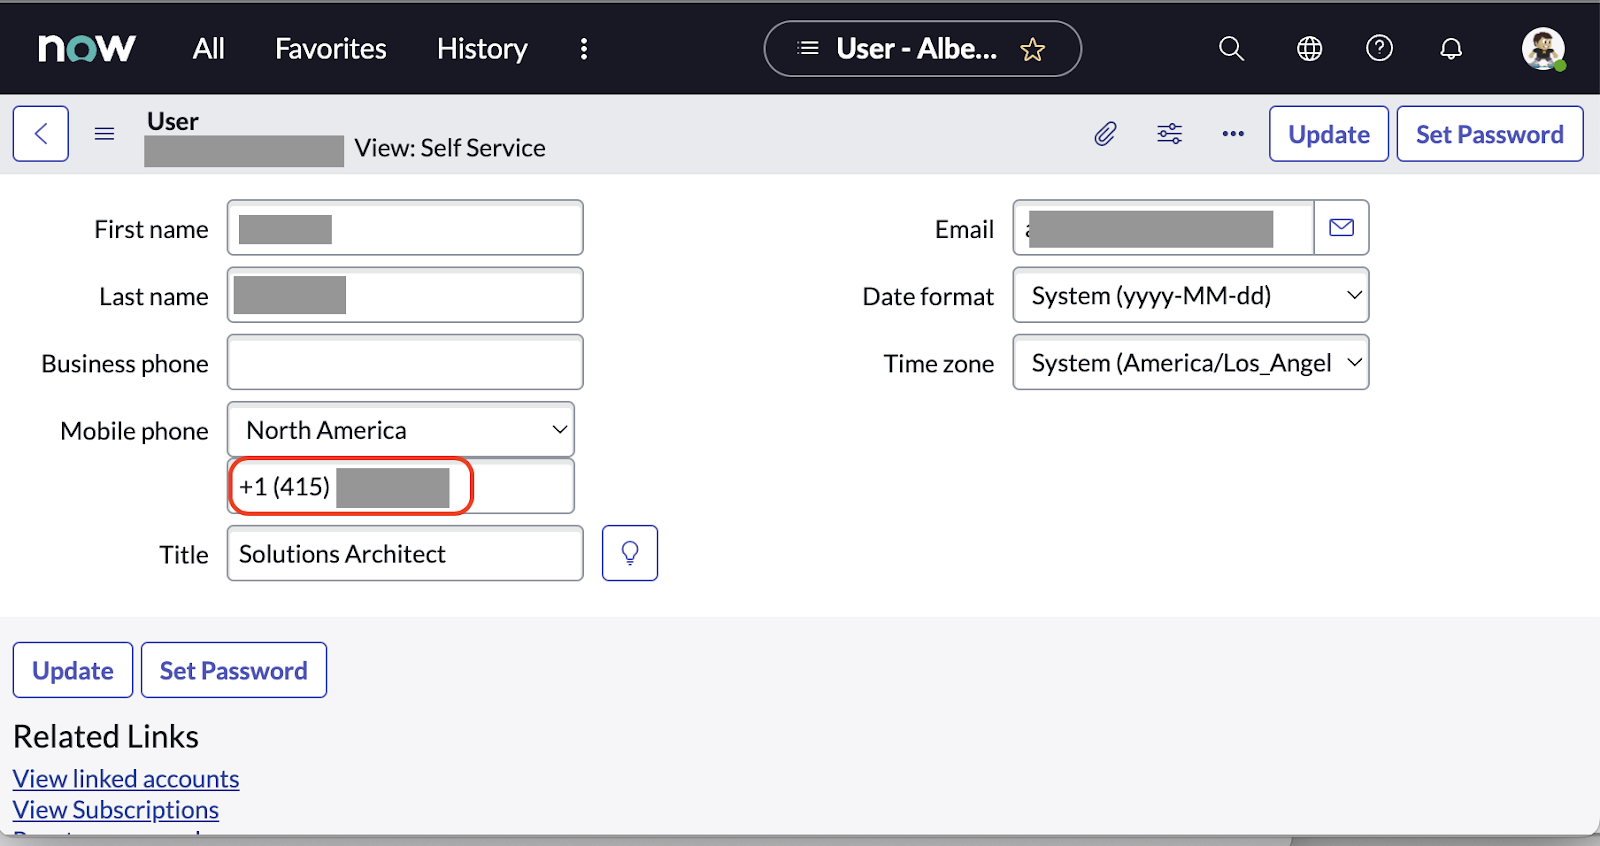 Mobile Phone field in ServiceNow with Twilio